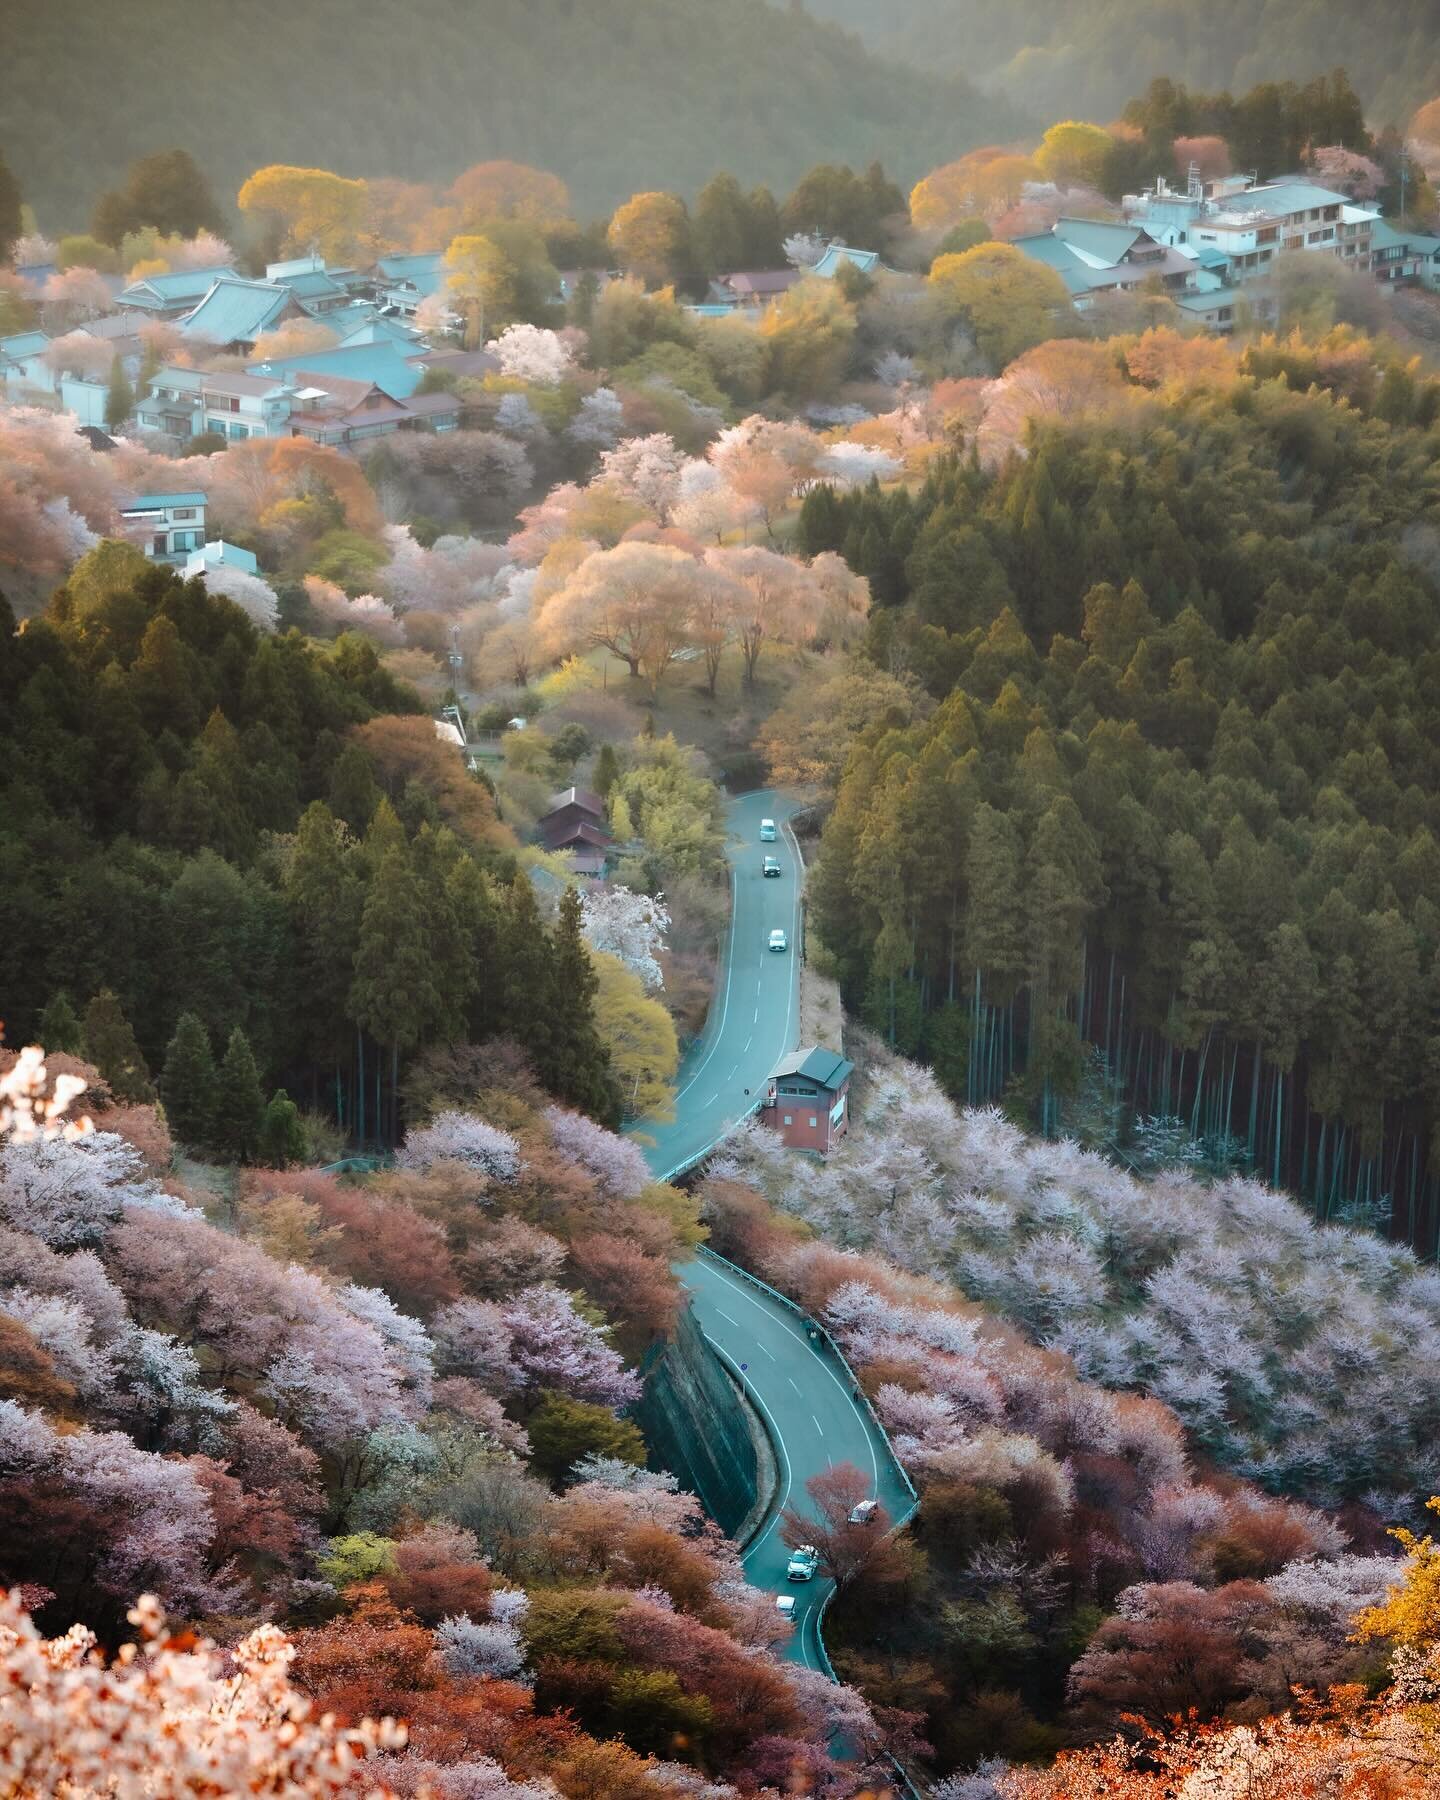 🌸 will you blossom in time for us this year?

#visualspassport_japan 
#hellofrom #吉野山 #nikonhongkong #nikonasia 
#桜スポット #花見 #voyaged #nomadict #1x #visitjapanjp #visitjapanhknow